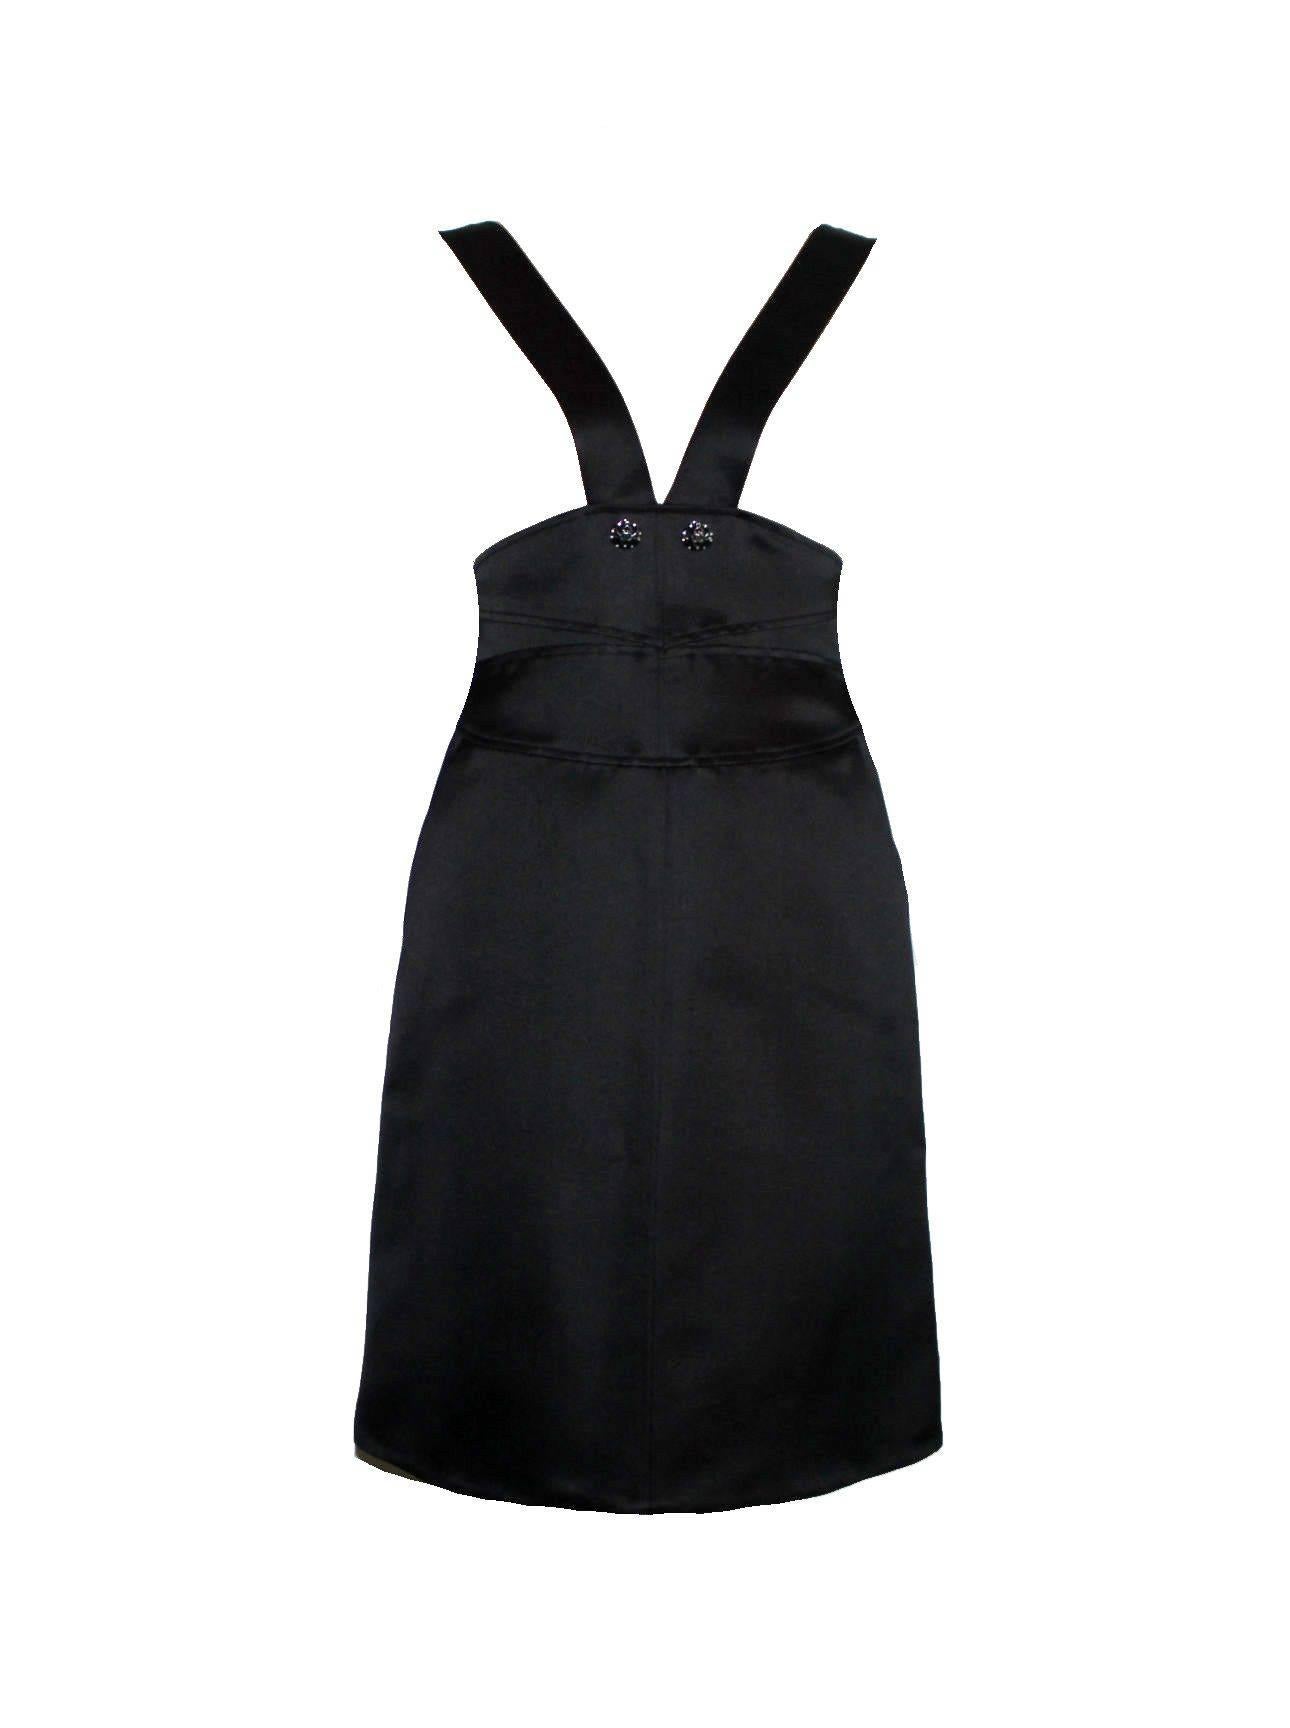 A modern but classic version of the famous little black dress by Chanel
Consisting of two pieces, dress and coat
Dress features a deep V neck with straps joining at the waist.
Straps held at waist by 2 classy crystal CC logo buttons
Two front